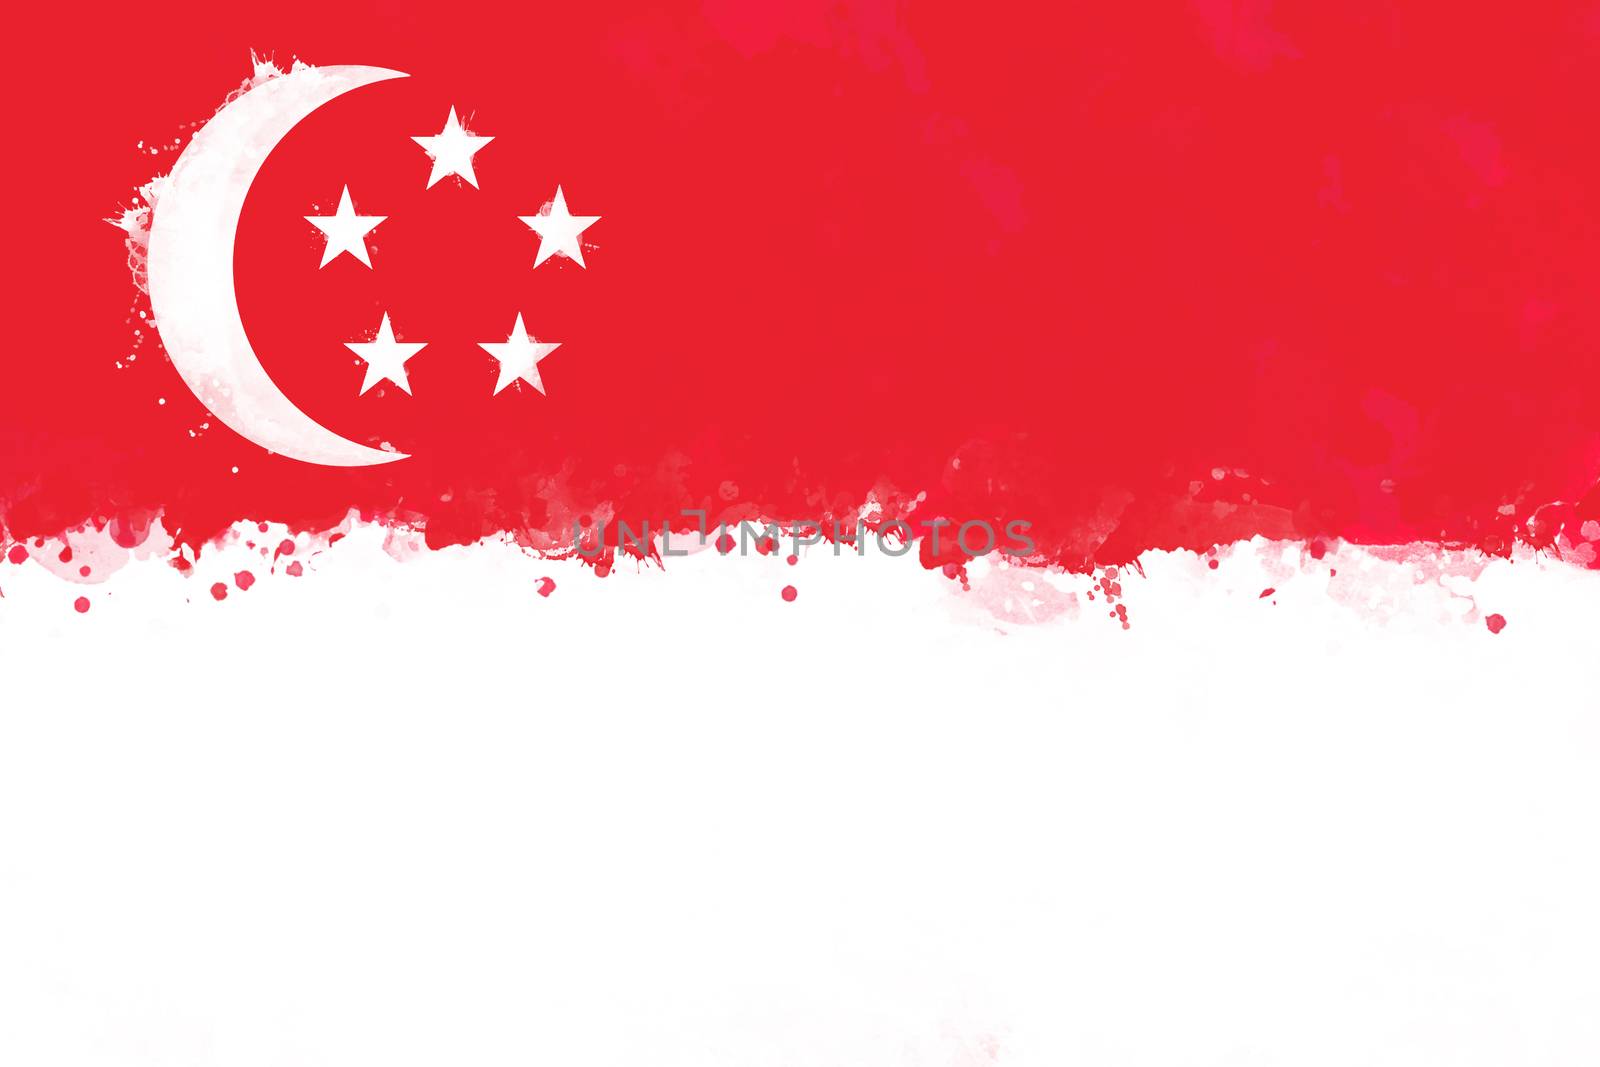 Flag of Singapore by watercolor paint brush, grunge style